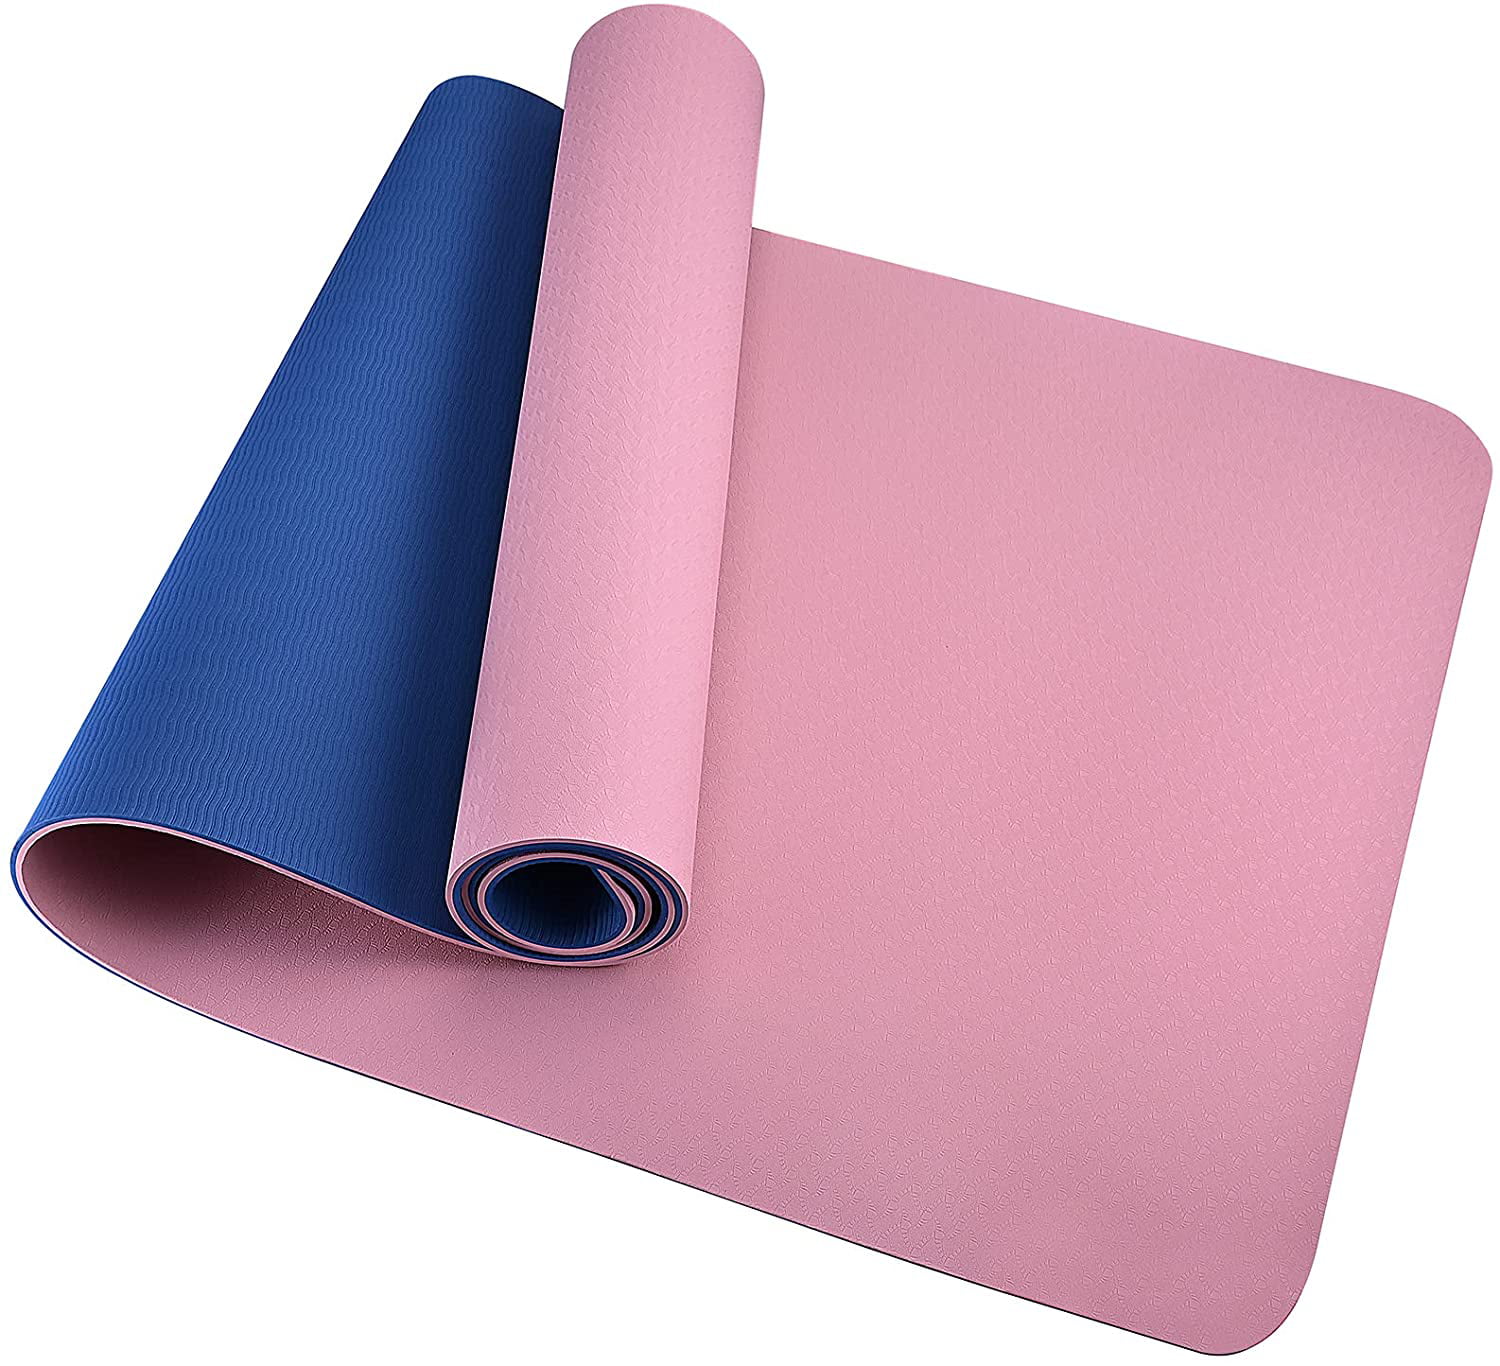 1/4-Inch Print Reversible Exercise & Fitness Mat for All BareFoot Workouts Non-Slip Yoga Mat with Carrying Strap & Storage Bag 68 x 24 x 6mm Thick Marjar Yoga Mat for Women / Men 